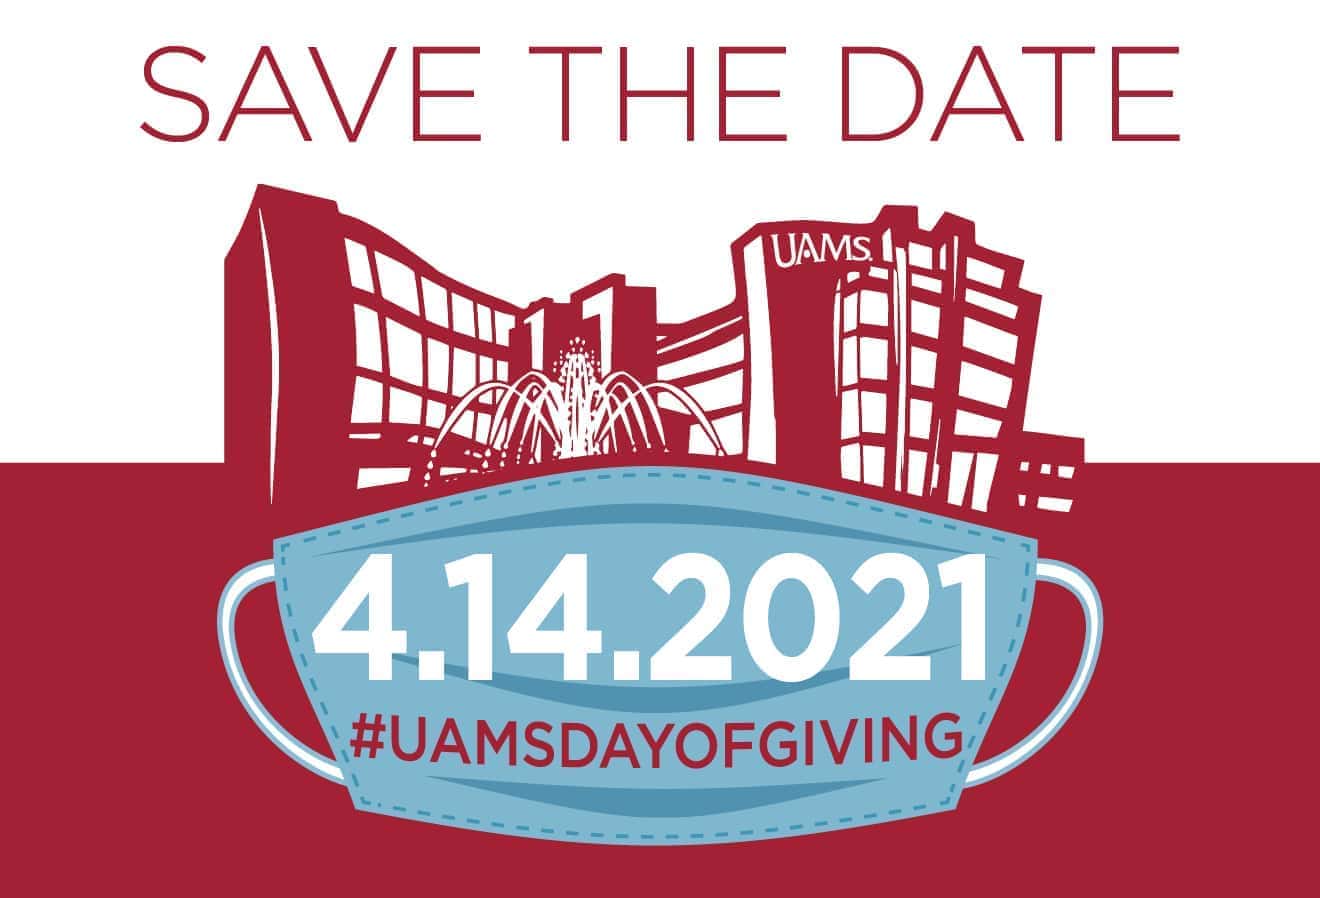 The UAMS Day of Giving will last 24 hours beginning April 14.